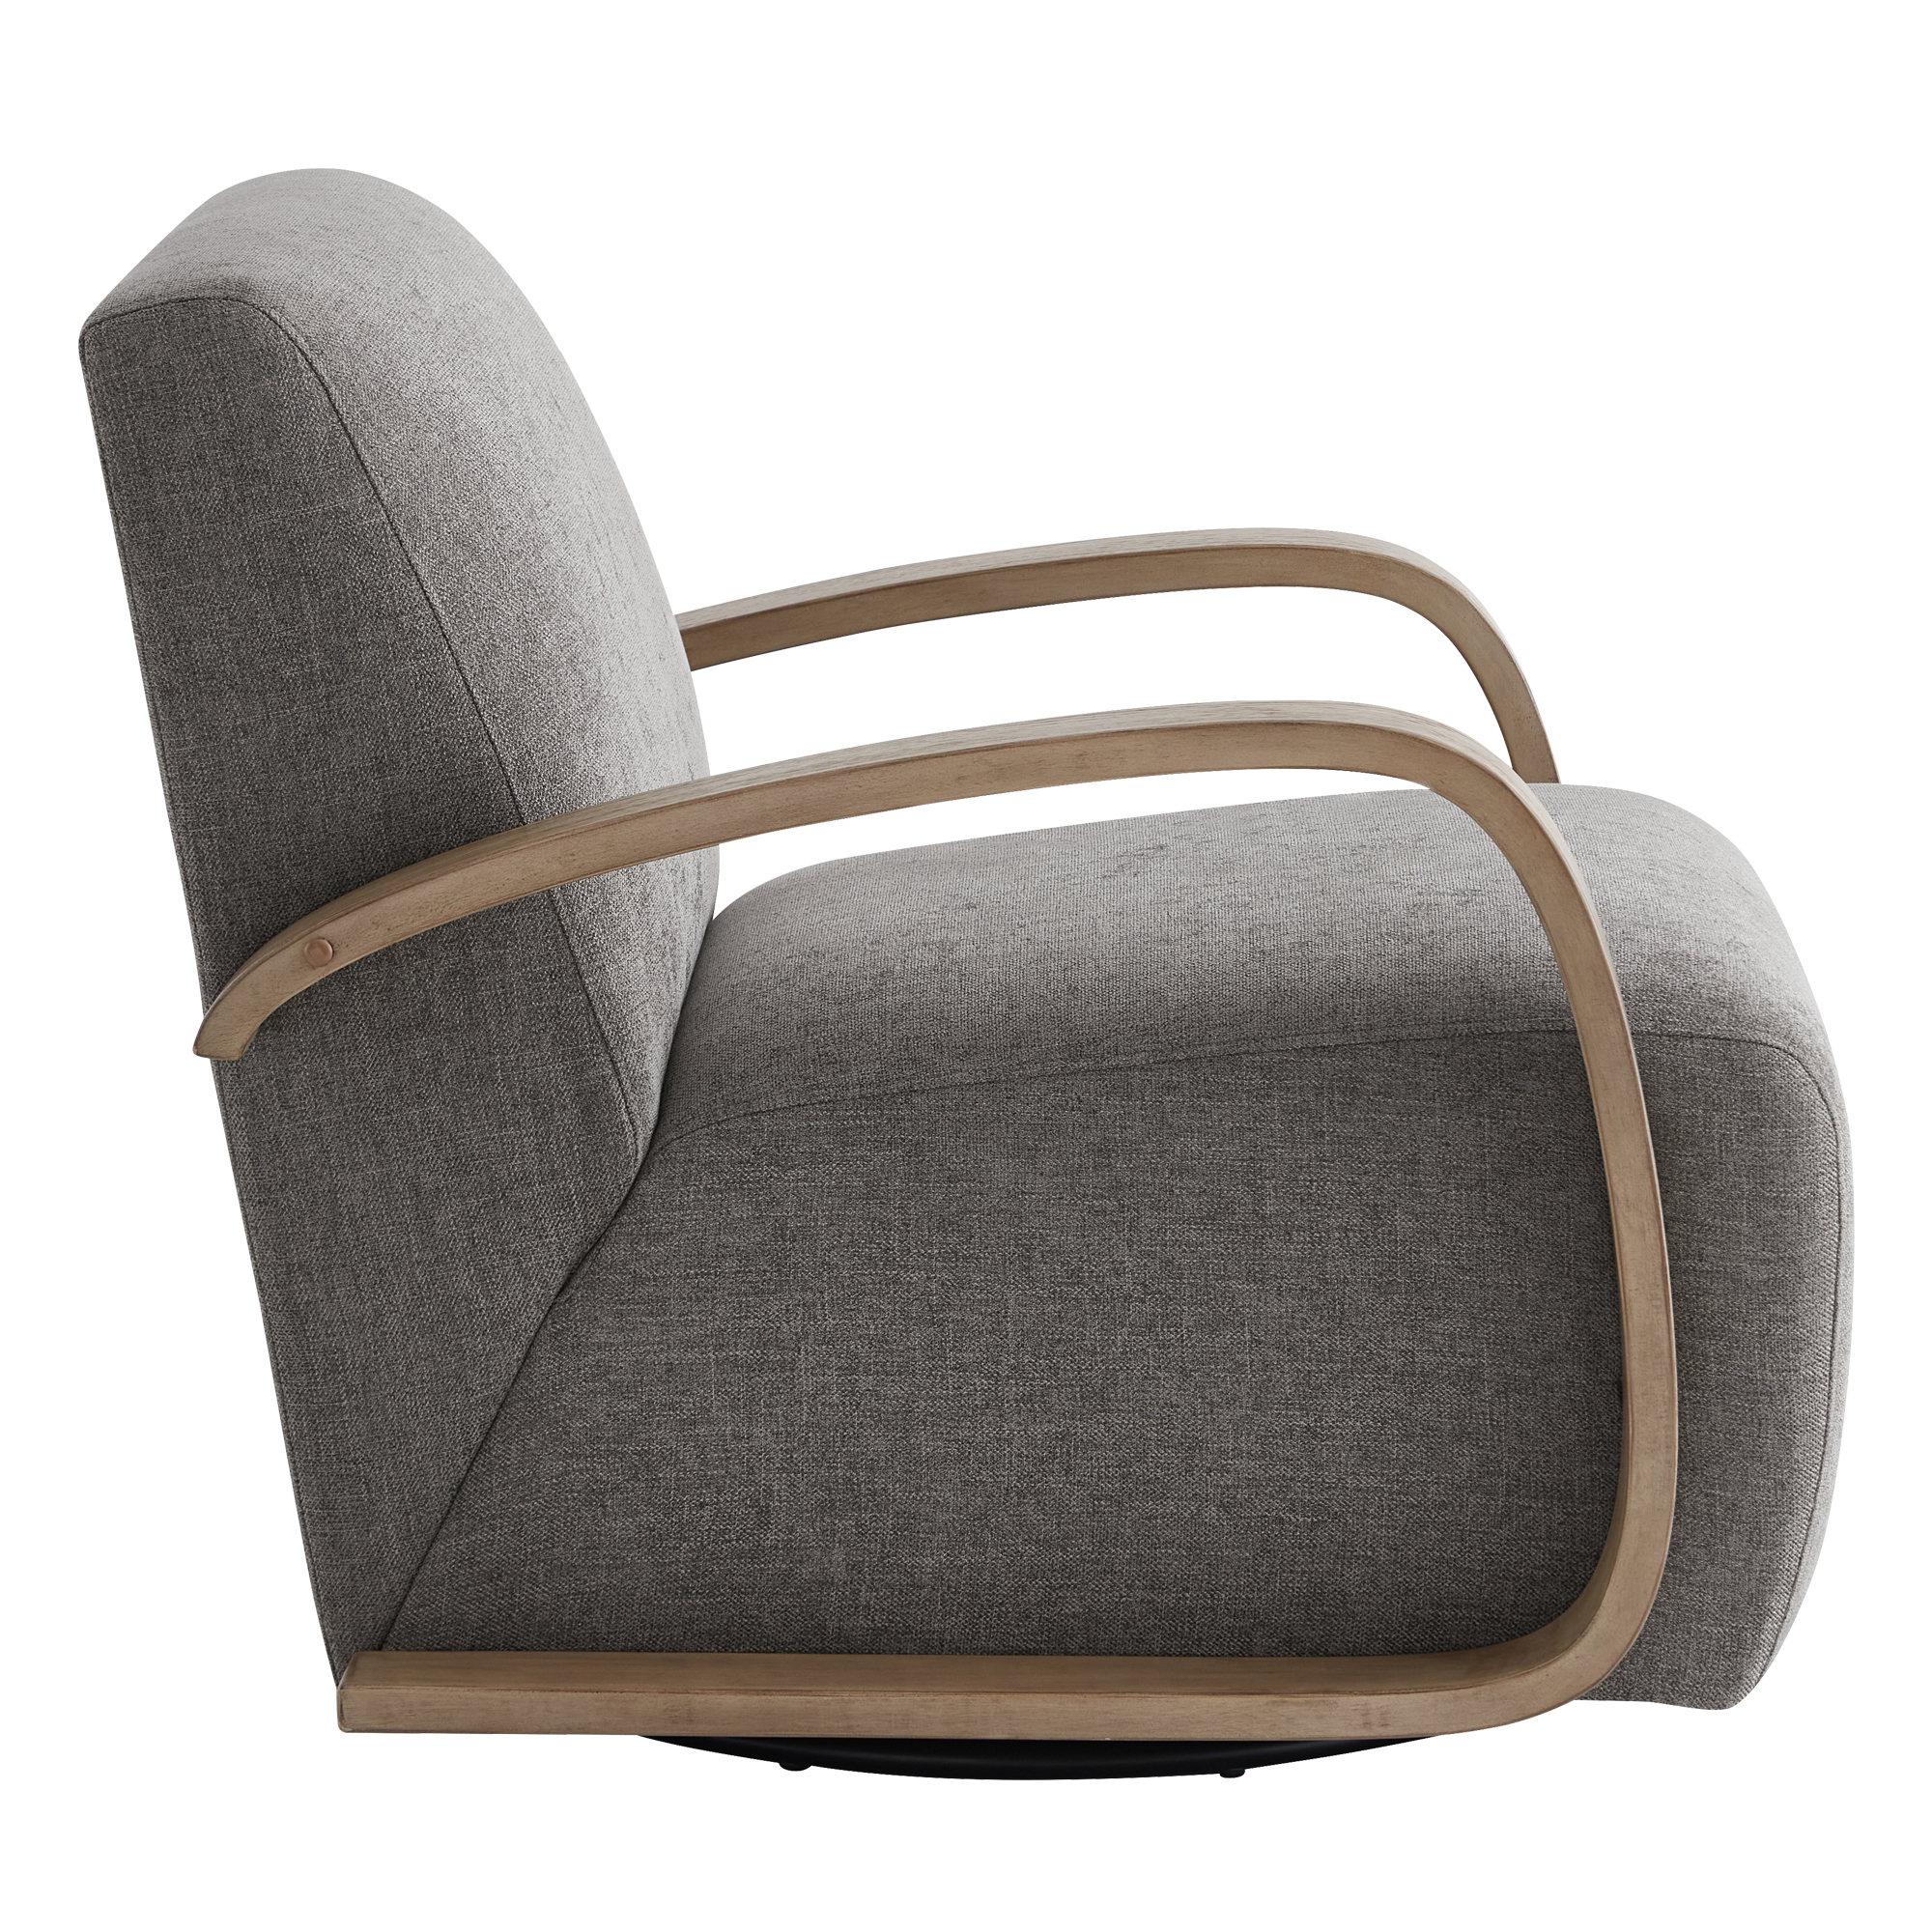 CHITA Swivel Accent Chair with U-shaped Wood Arm for Living Room Beedroom, Dark Gray & Gray Wood - image 5 of 8